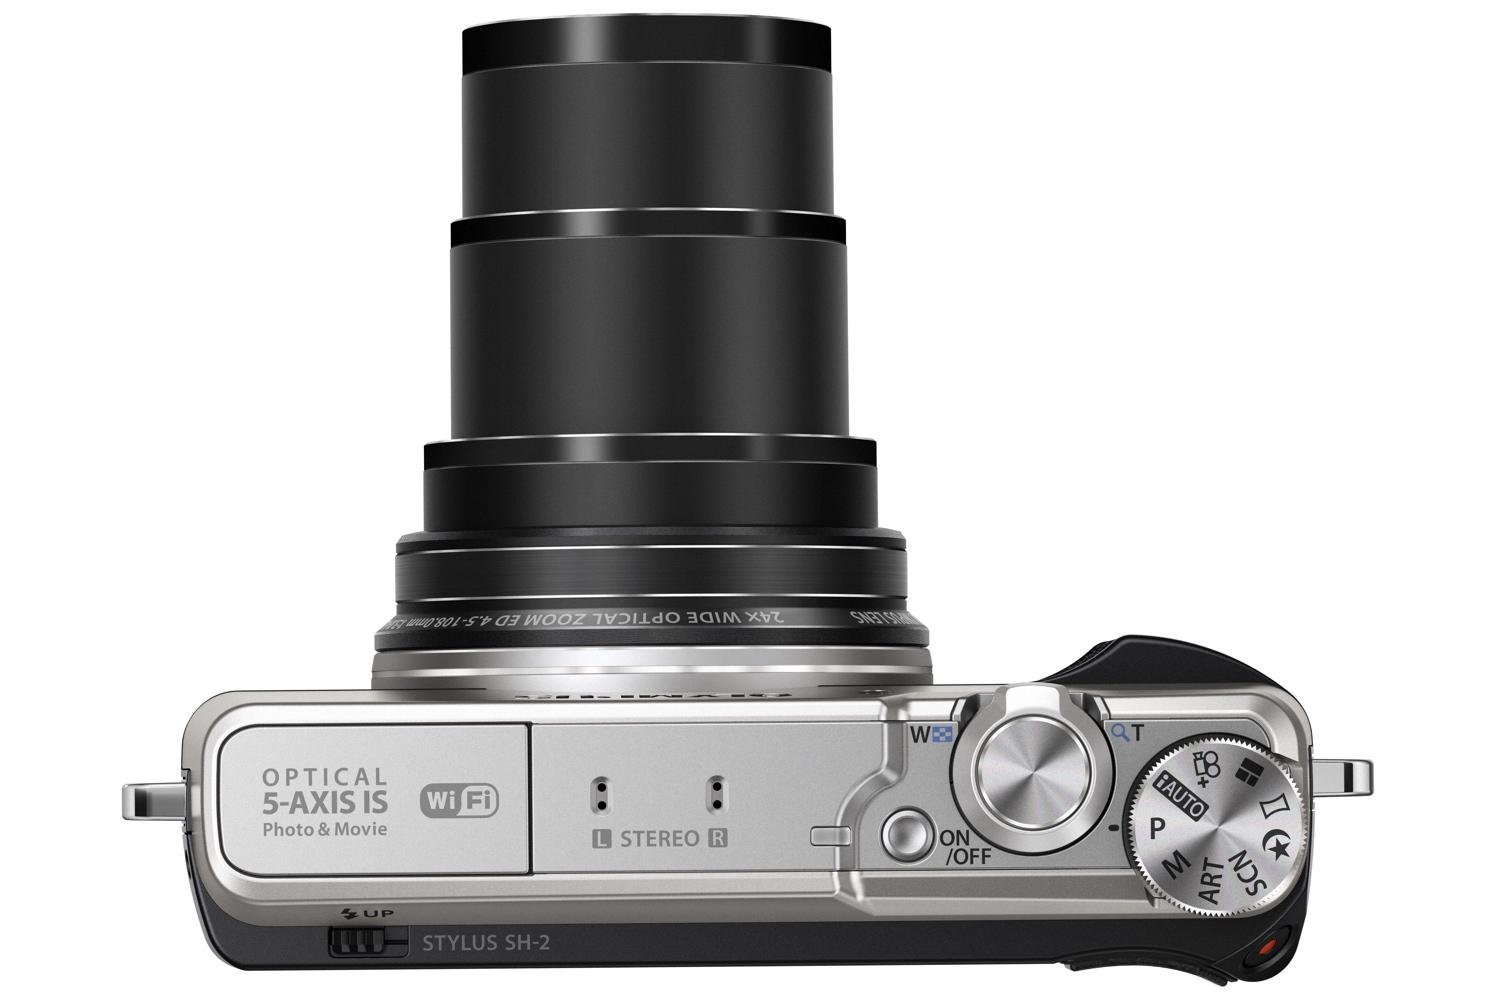 olympus stylus sh 2 compact camera retains 5 axis stabilization adds new night modes sh2 12